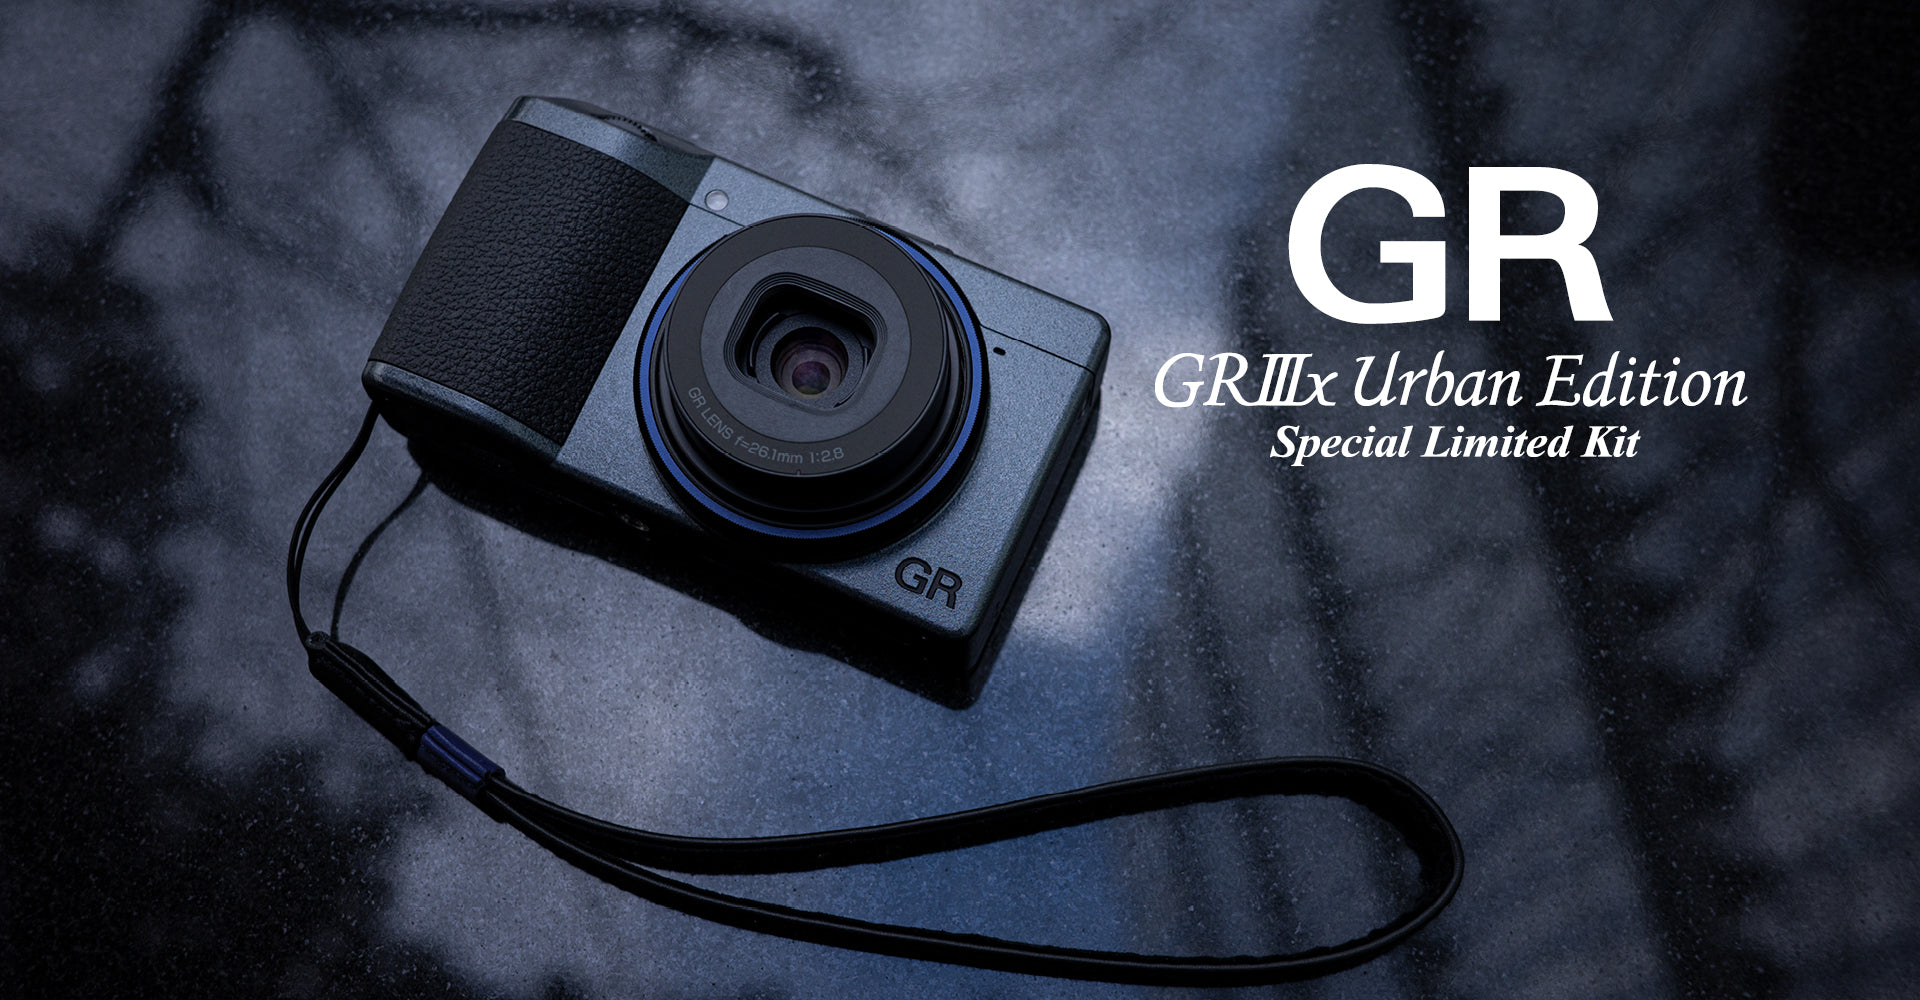 RICOH GR - Always in the Heart of PHOTOGRAPHER – Ricoh GR Official